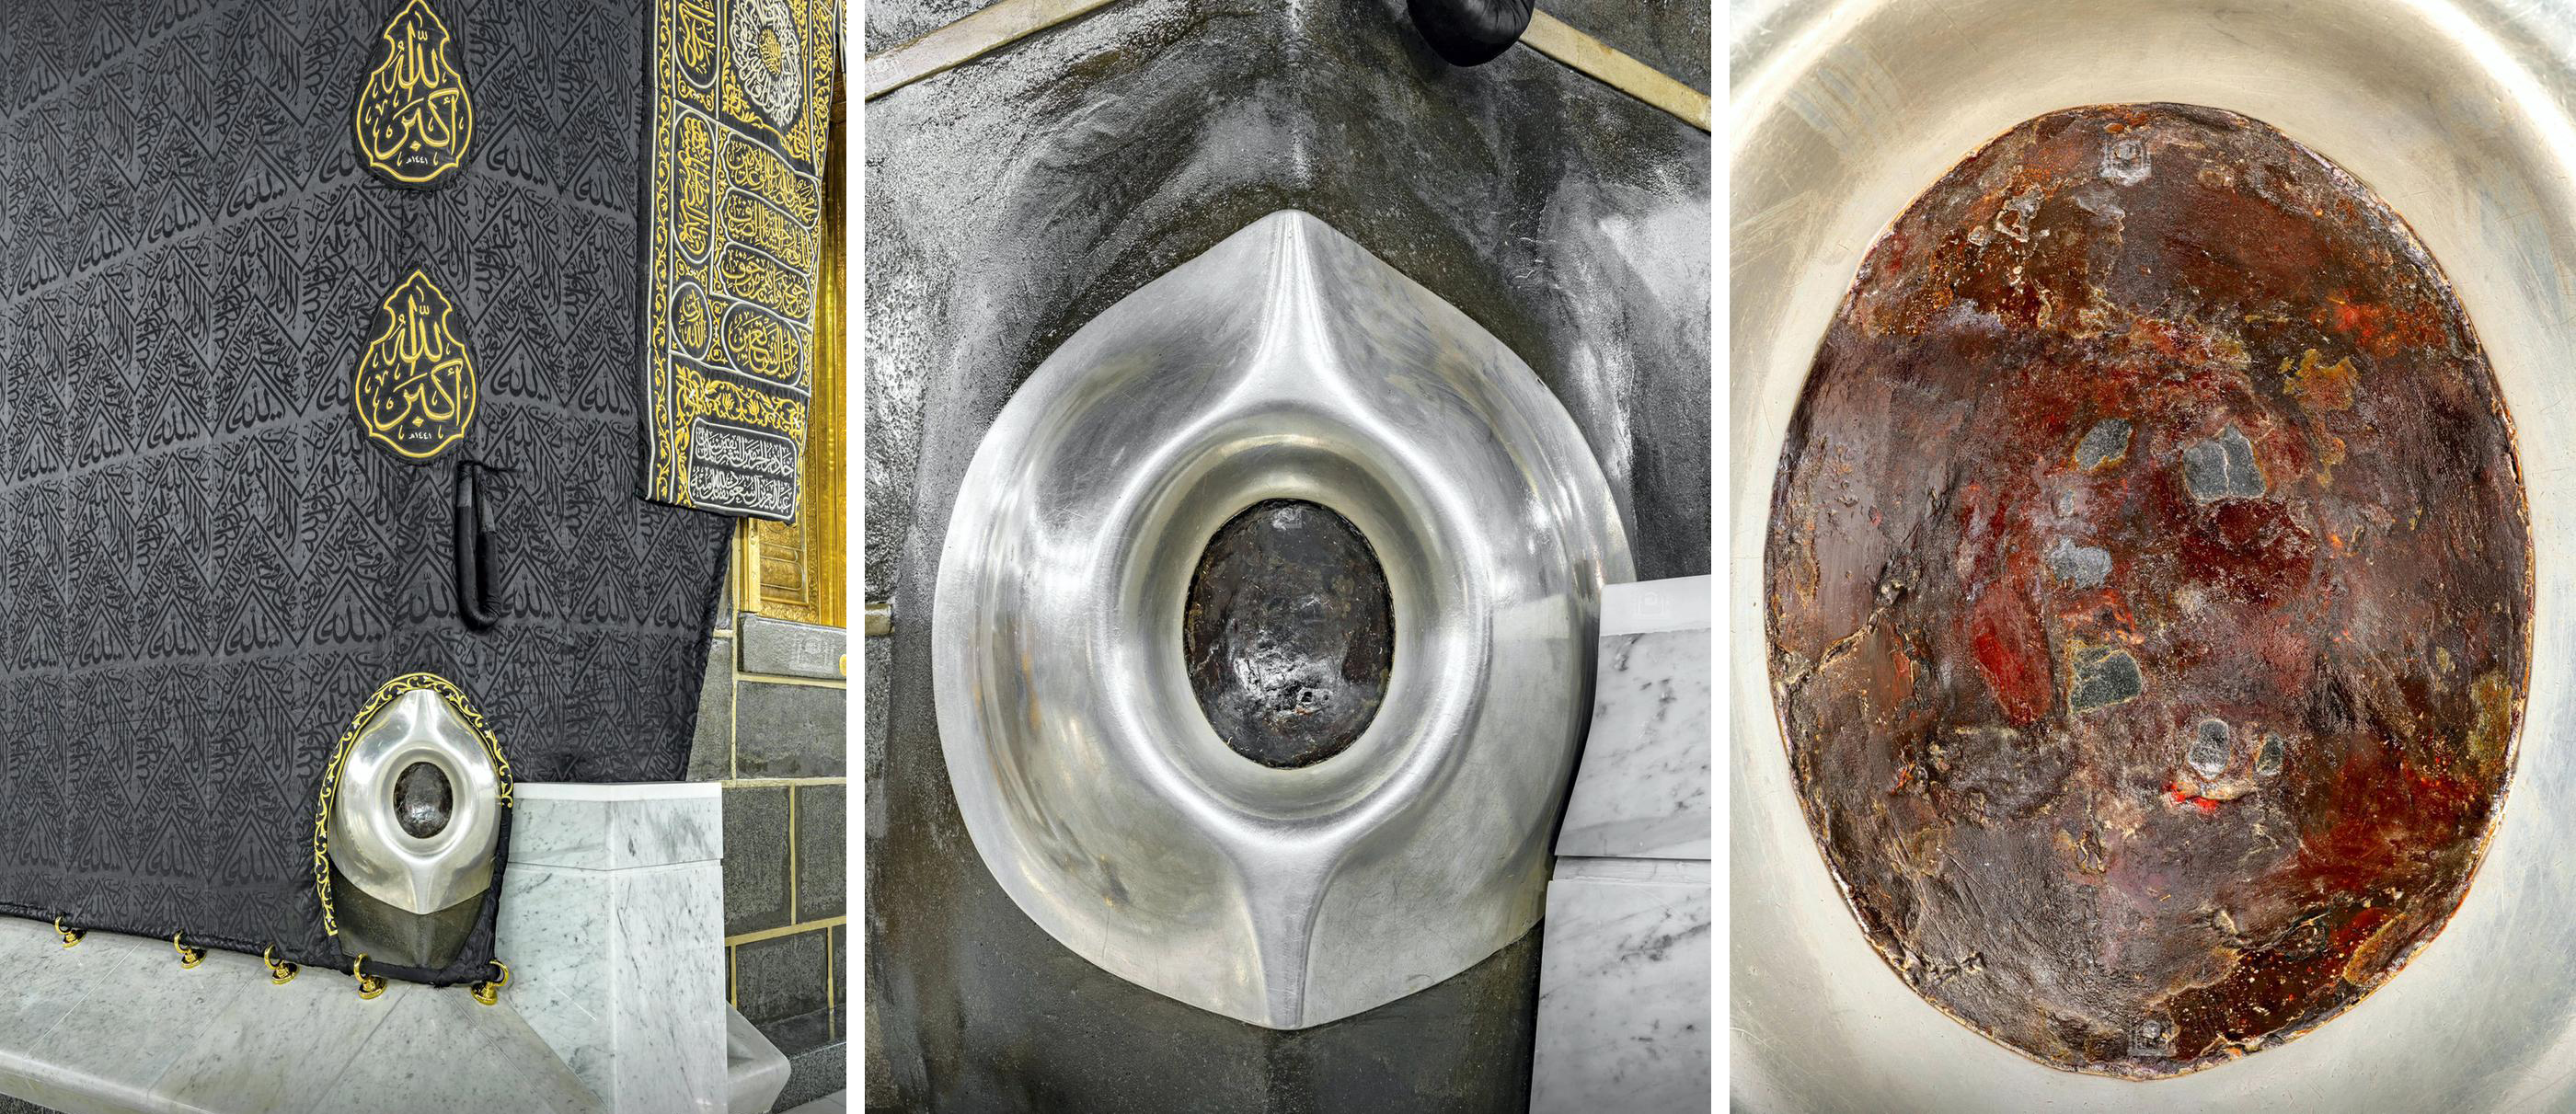 Eastern corner of the Kaaba with the Black Stone (photos: Saudi Arabia General Presidency of the Grand Mosque and the Prophet's Mosque)